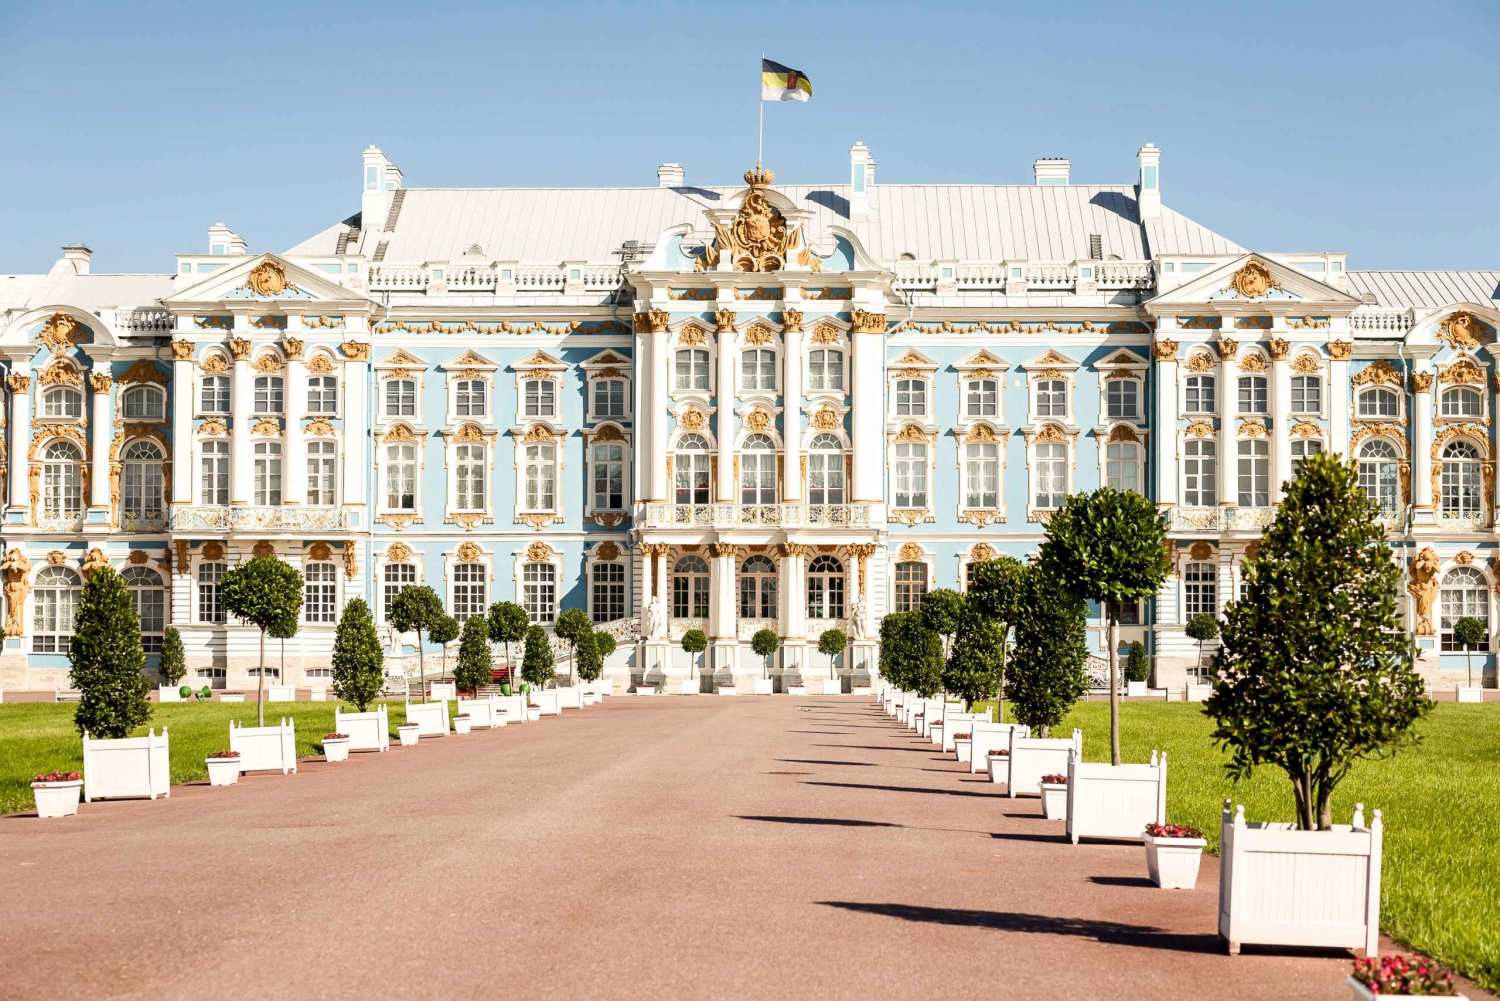 From St. Petersburg: Catherine Palace Tour with Amber Room